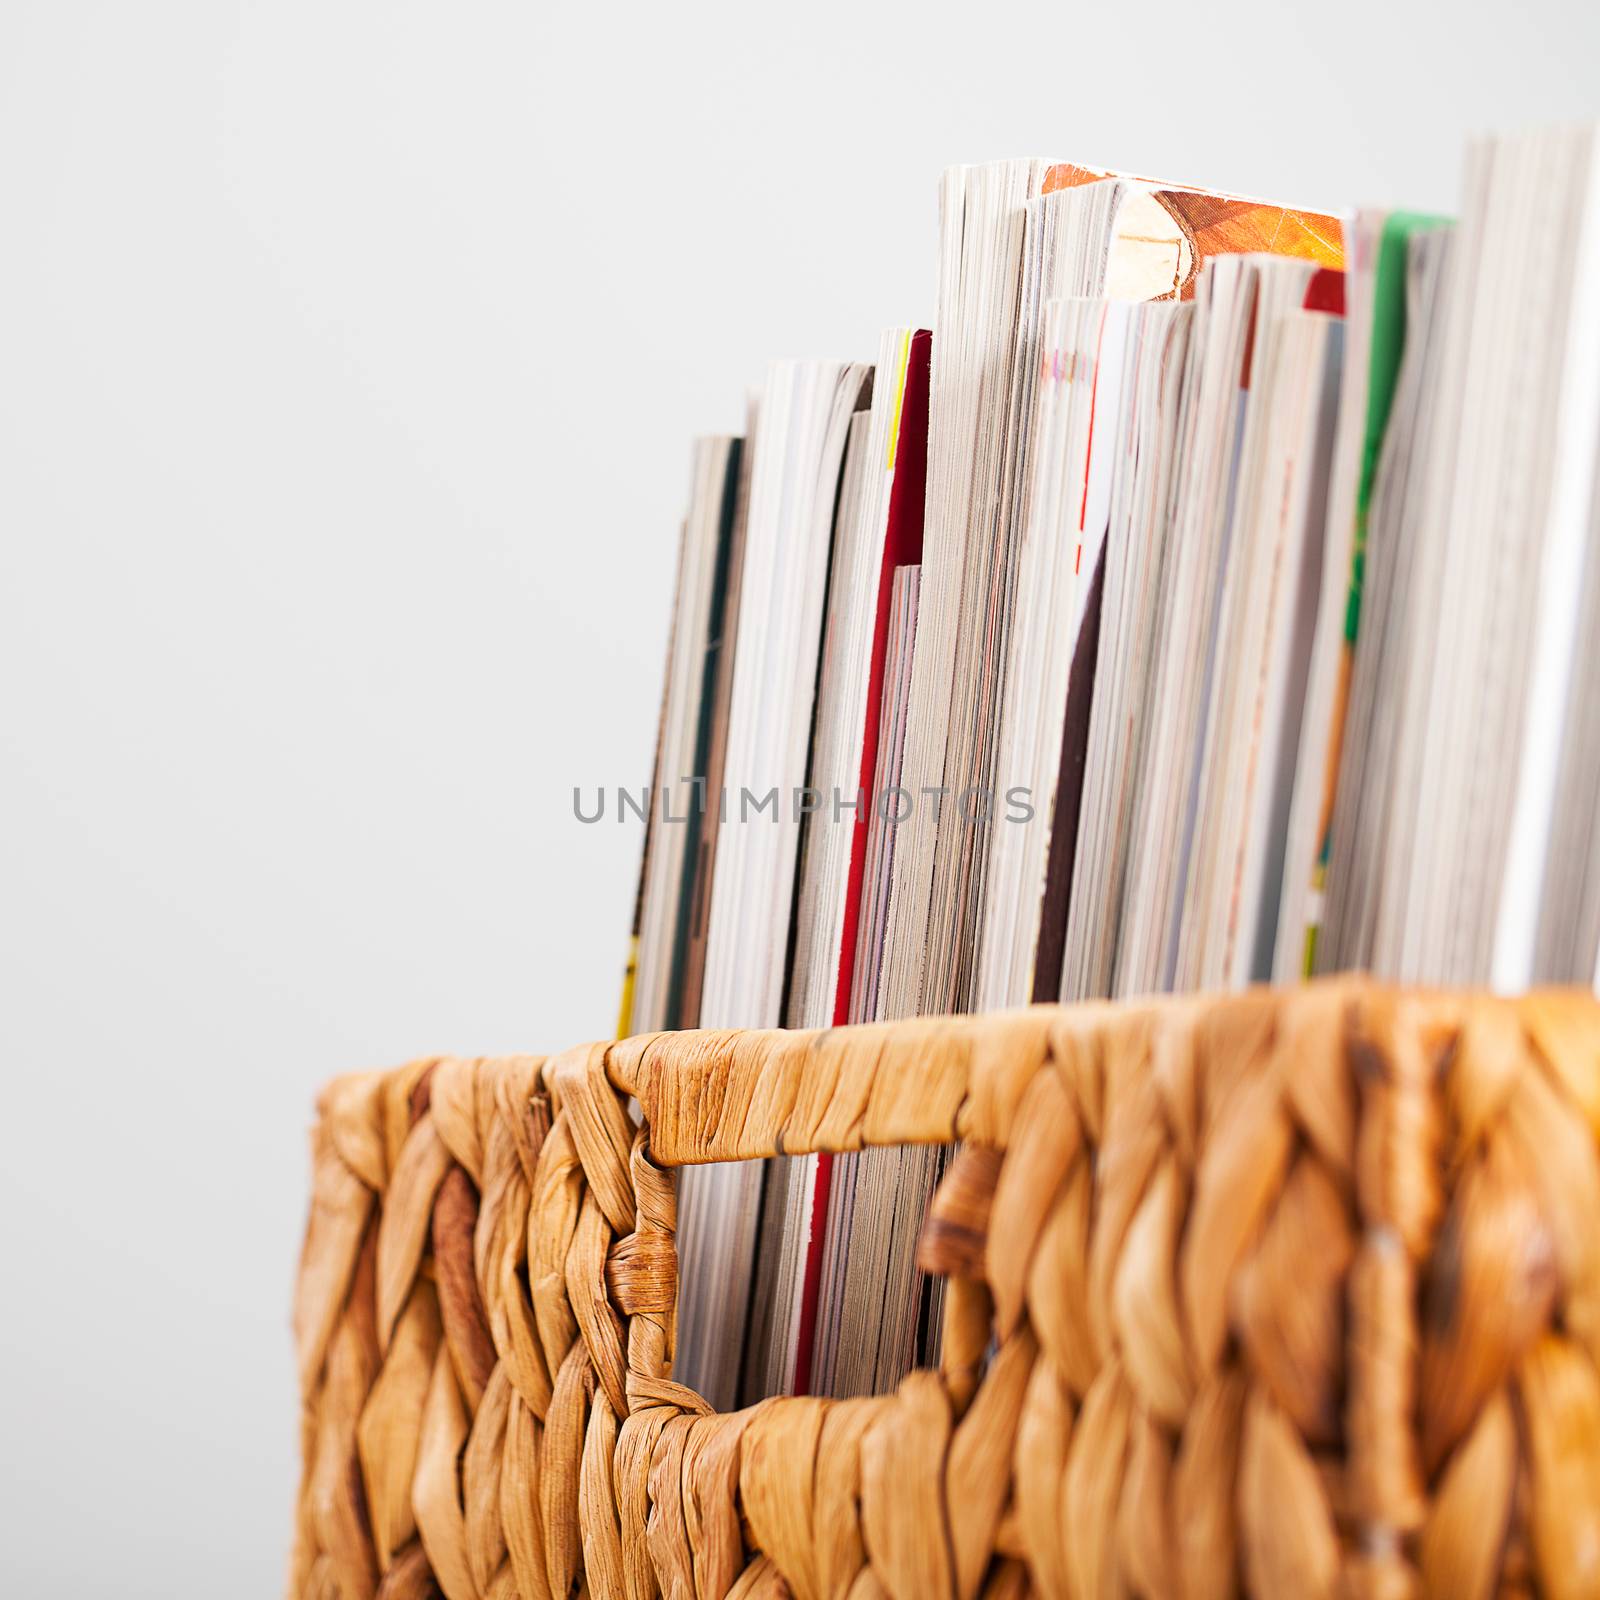 Closeup image of magazines in a straw pleated box